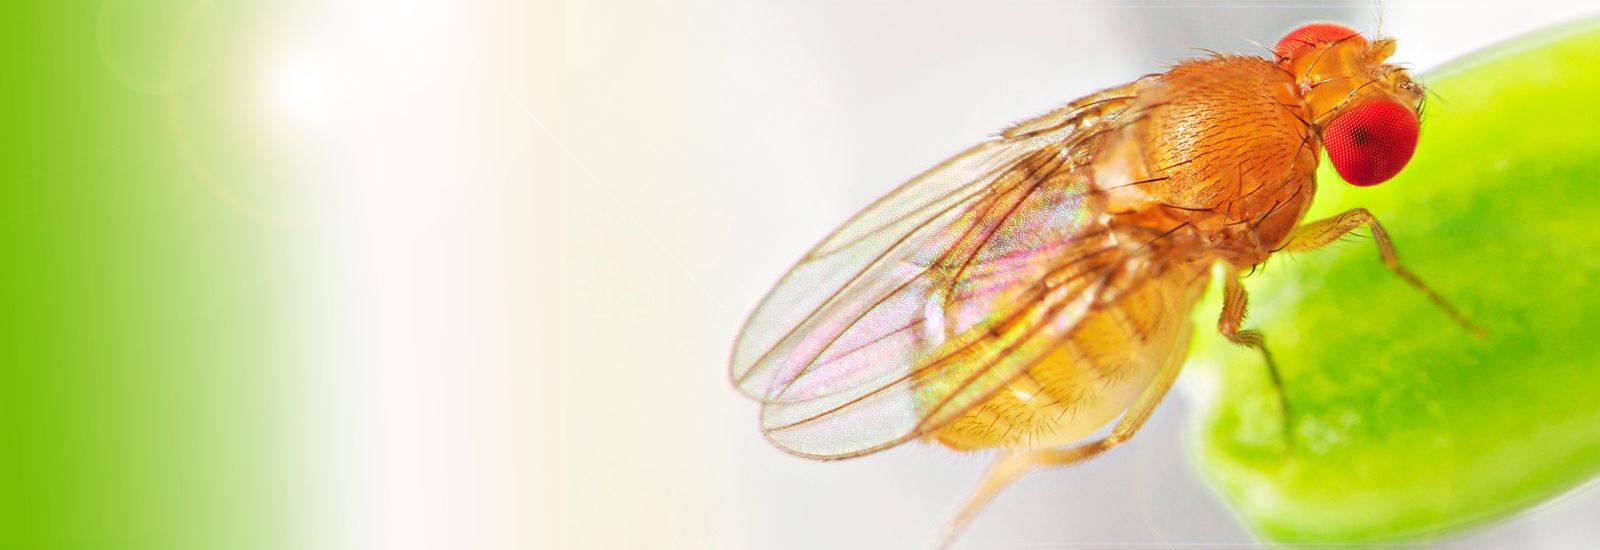 A close up photo of a fruit fly